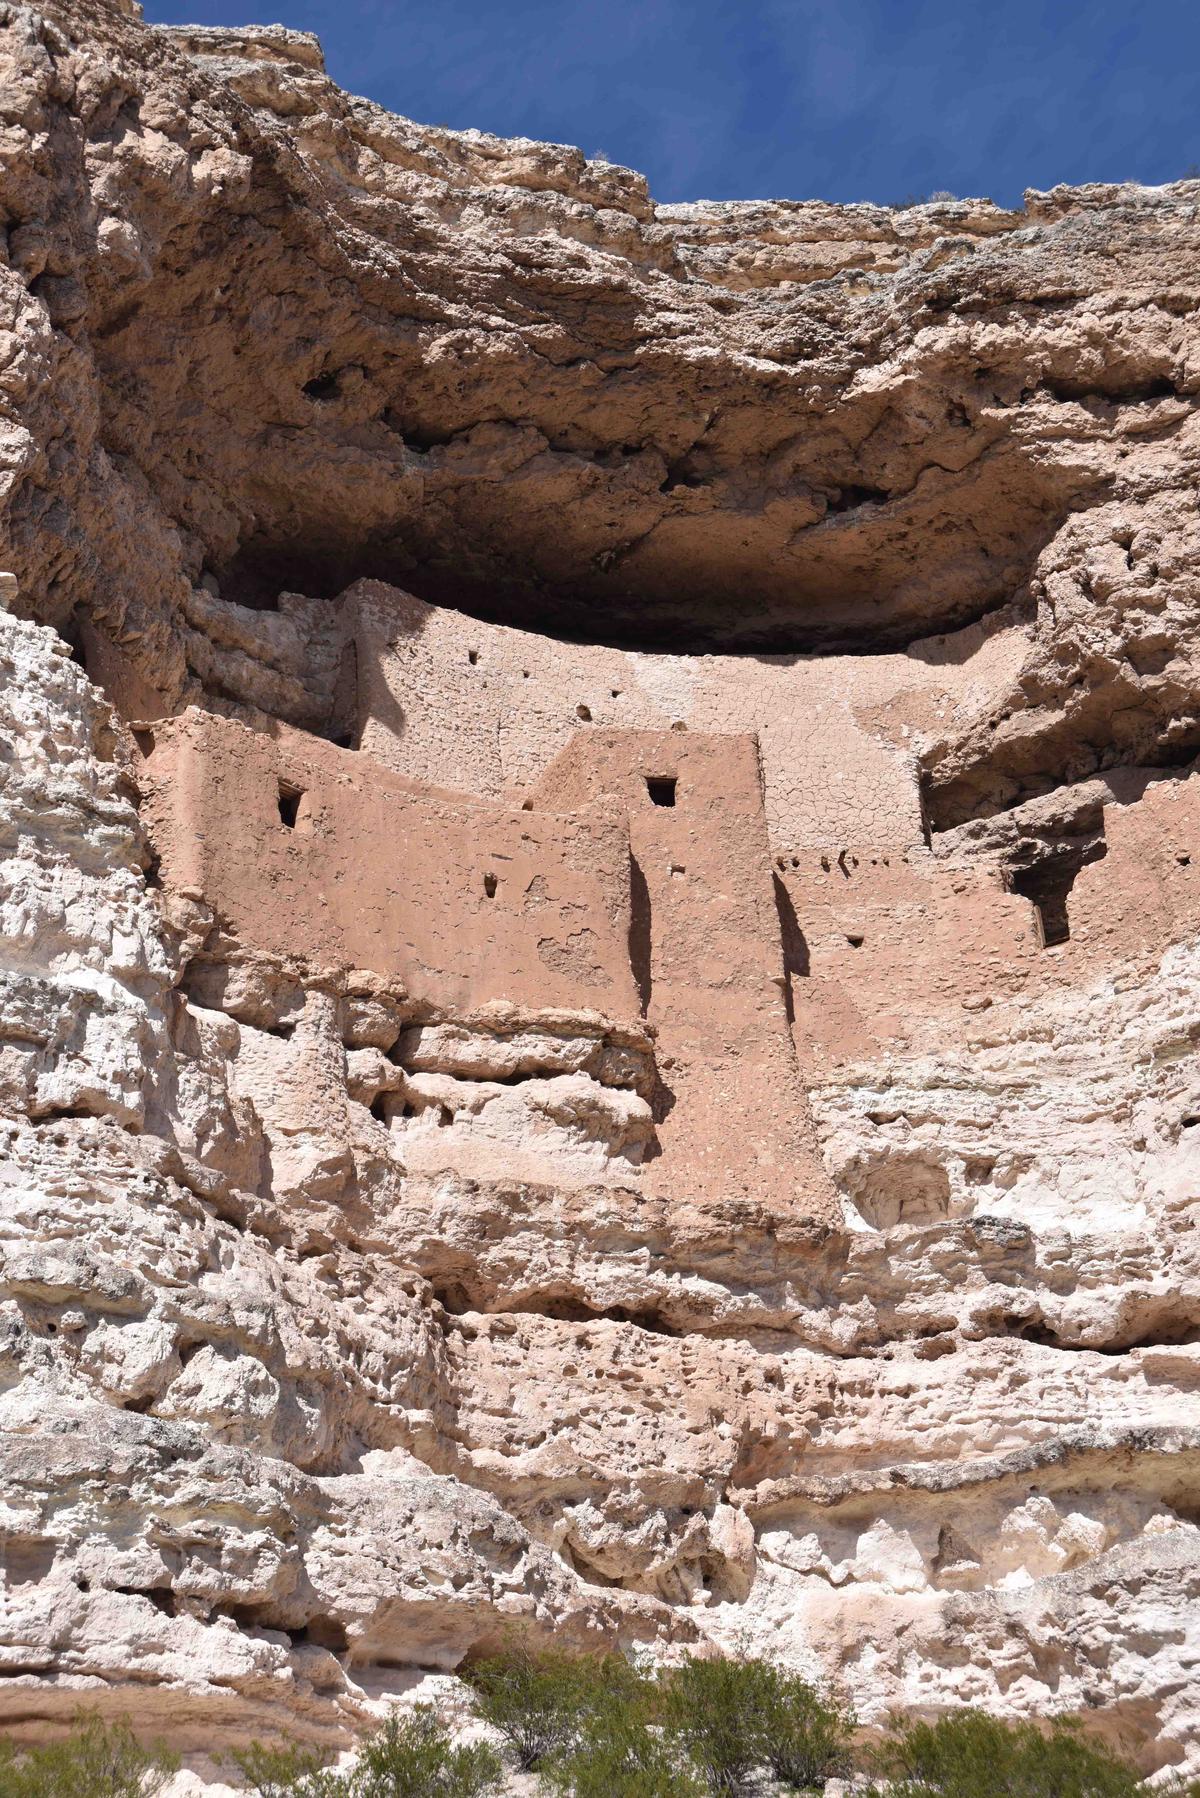 Today, Montezuma Castle, located in Verde Valley, Arizona, is a National Monument. (Paul R. Jones/Shutterstock)